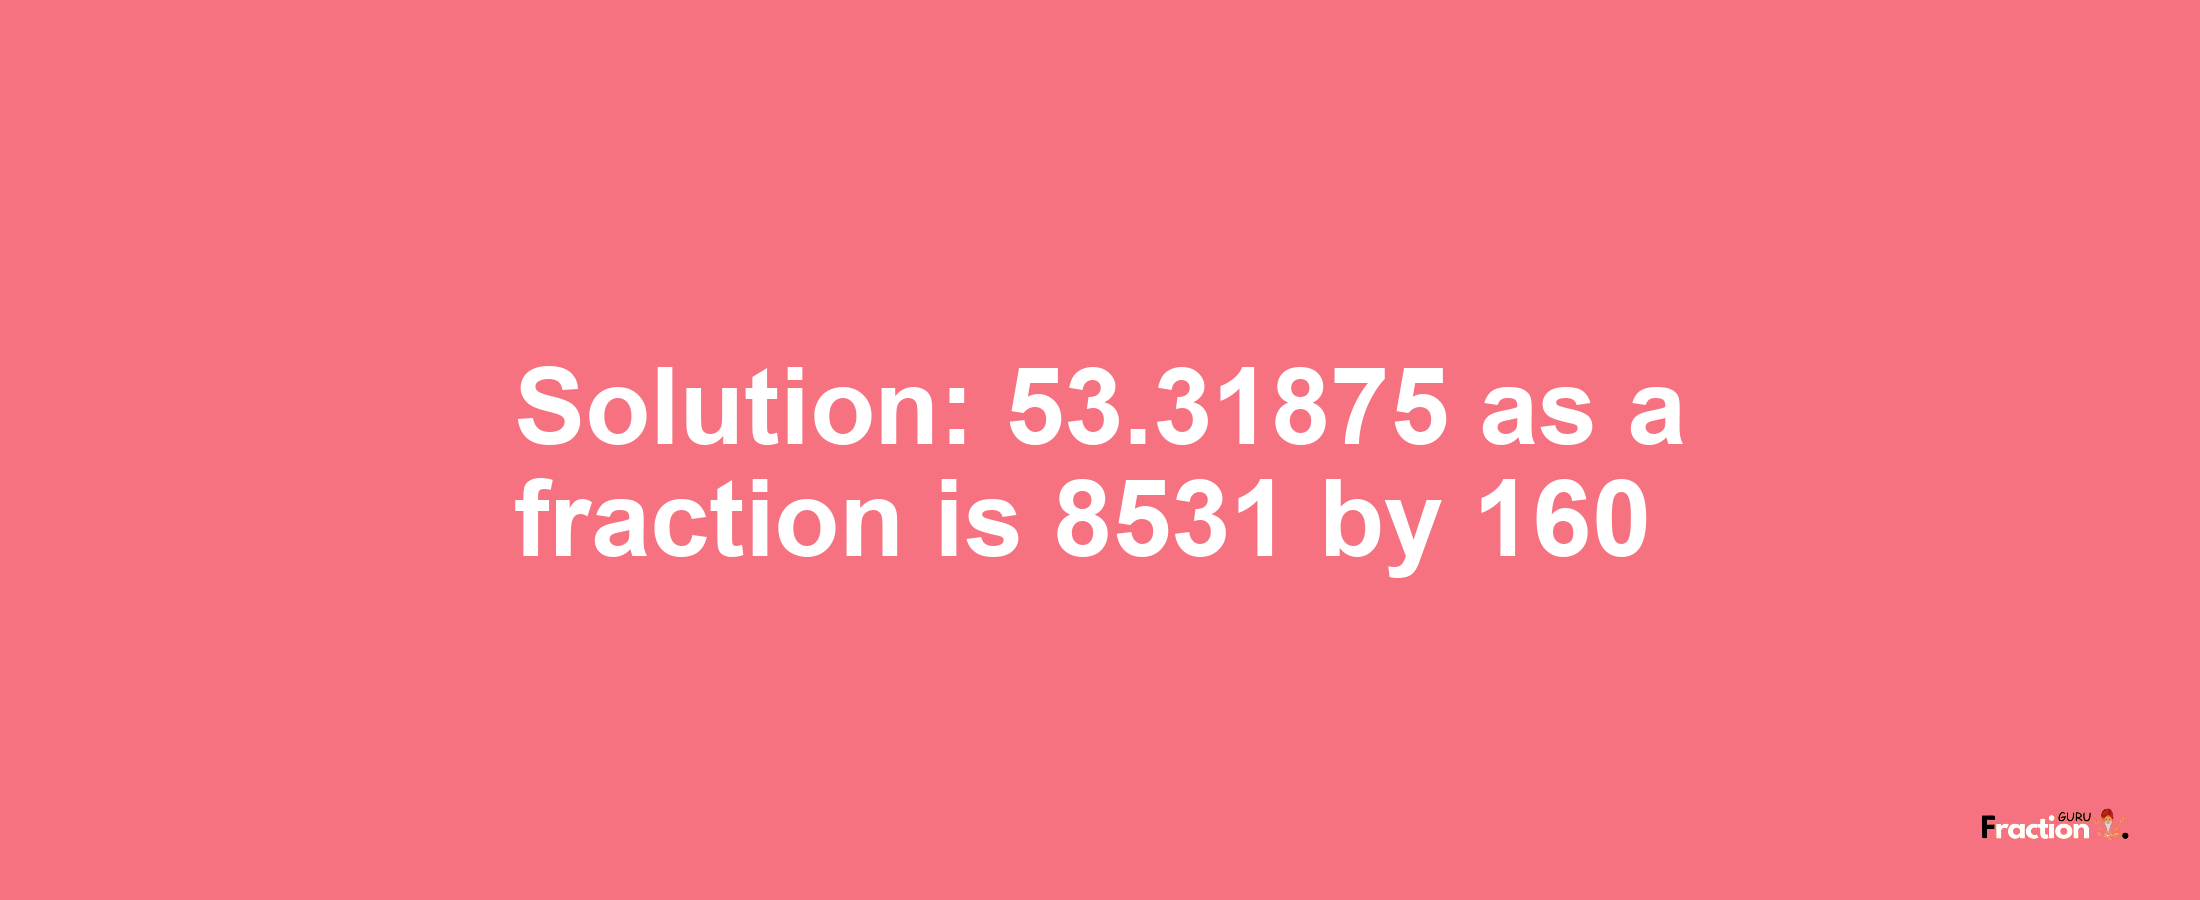 Solution:53.31875 as a fraction is 8531/160